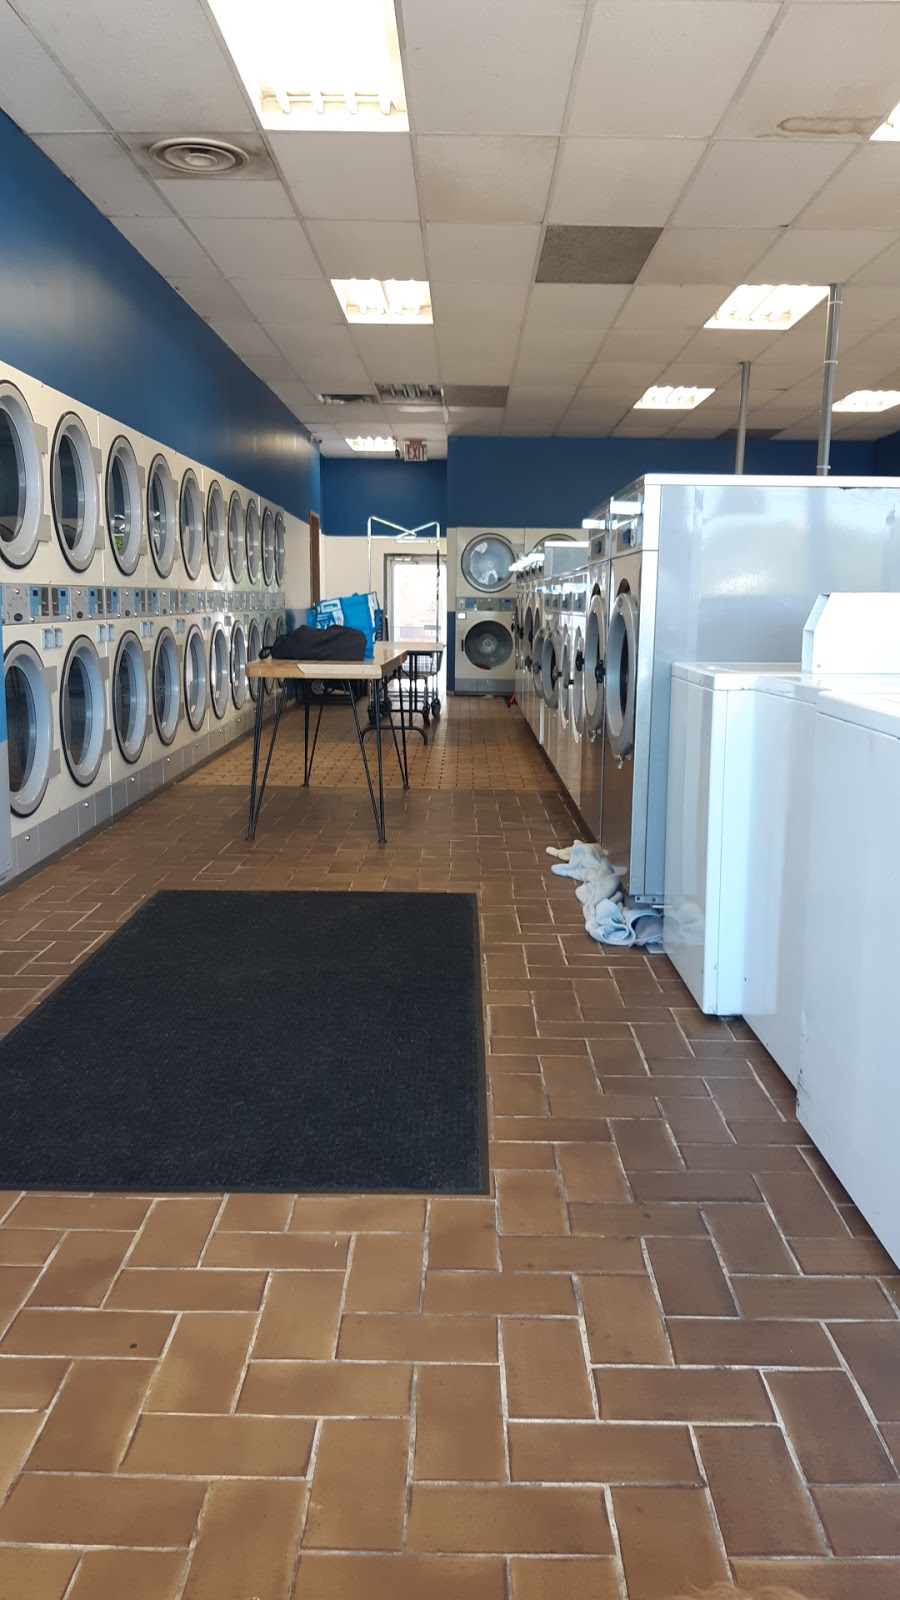 Super Coin Laundromat | laundry | 433 Simcoe St S, Oshawa, ON L1H 4J5, Canada | 9054355278 OR +1 905-435-5278